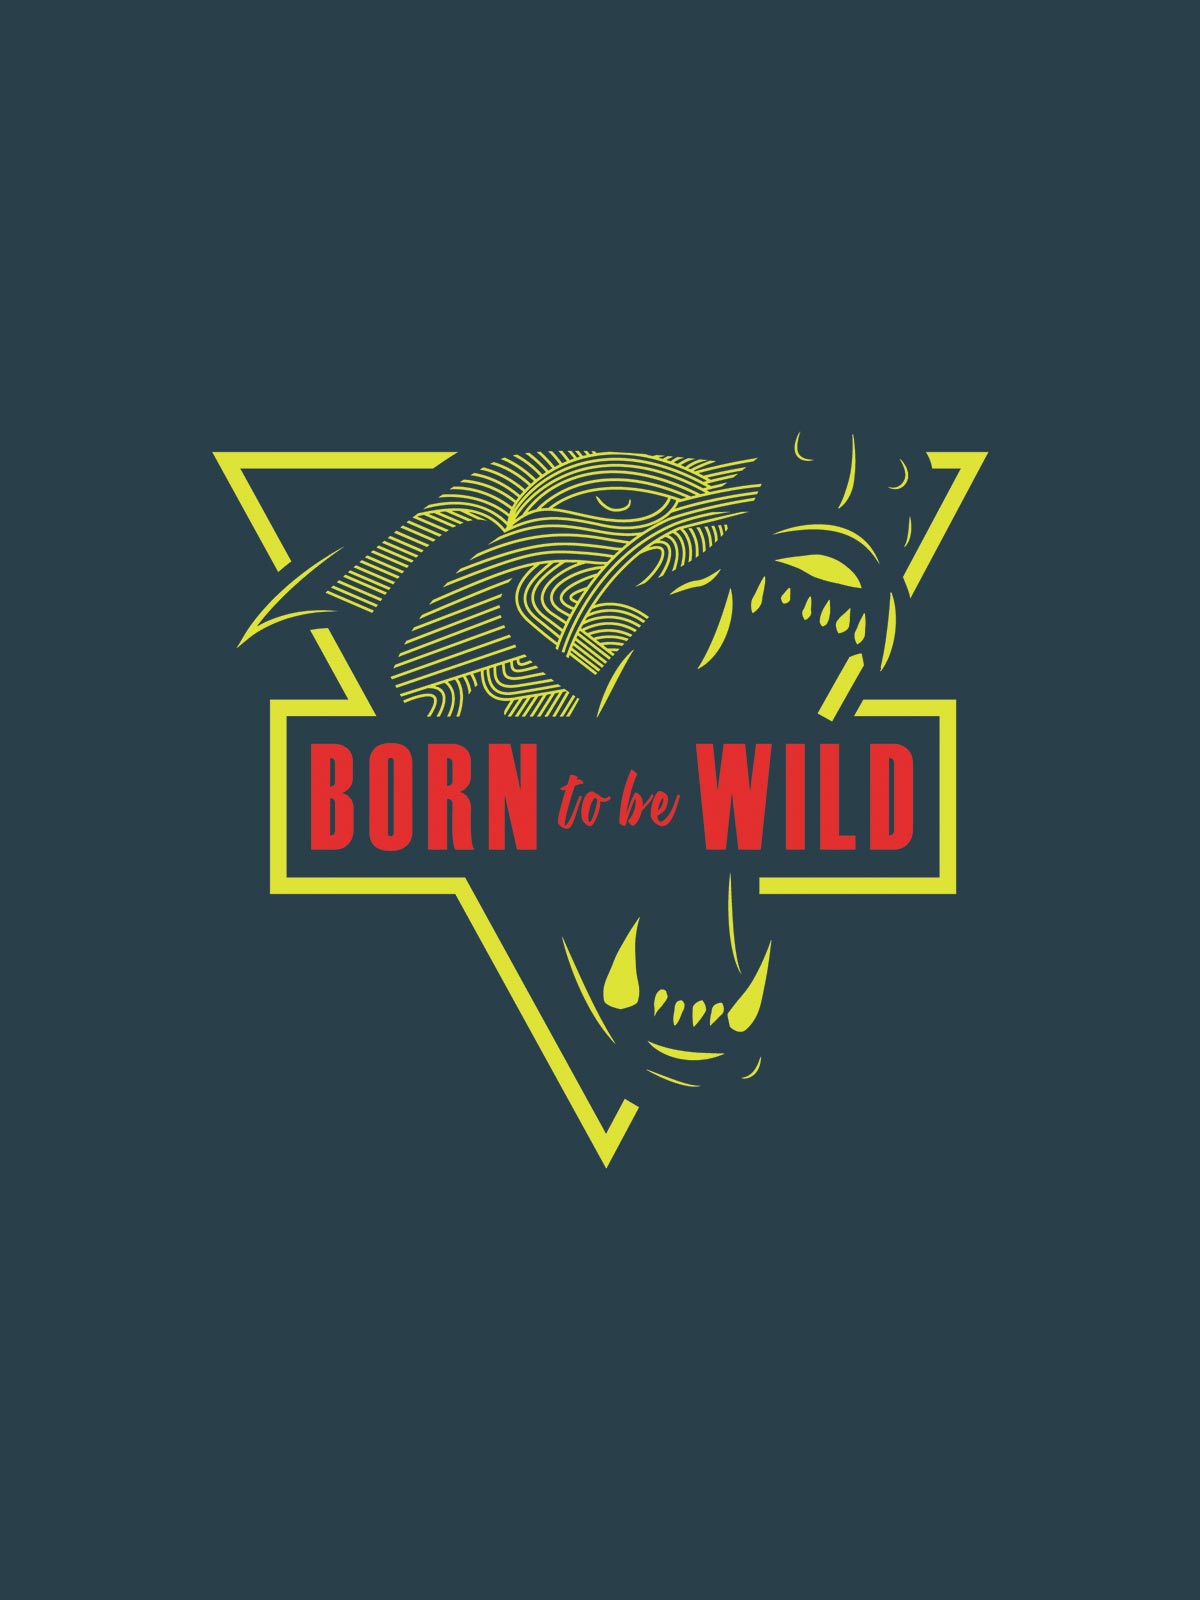 Born to be wild Printed Cotton Hoodie for men & women by shopghumakkad